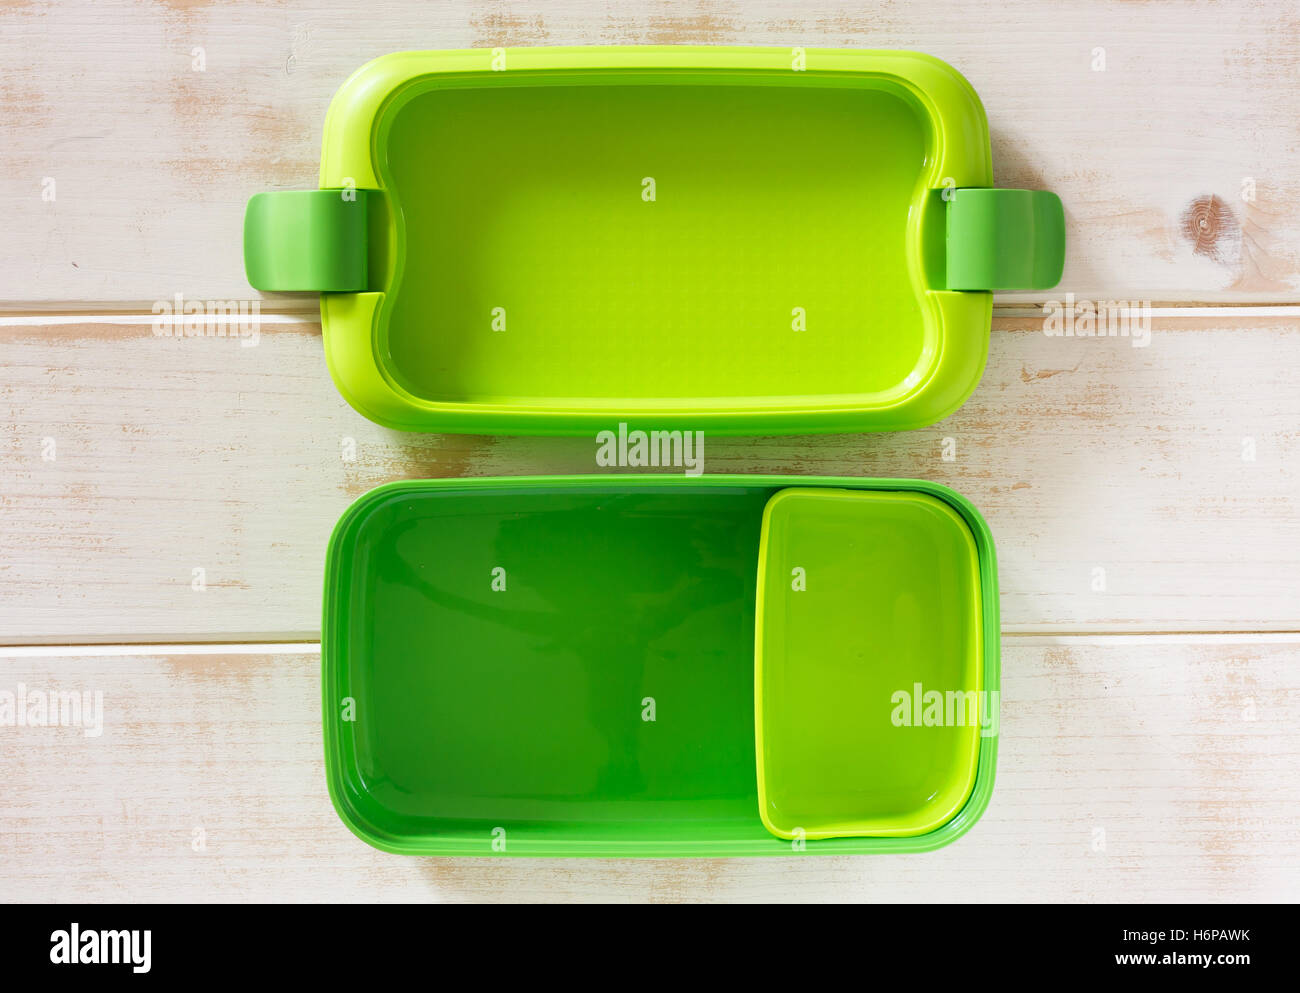 Green plastic lunch box on wooden background Stock Photo